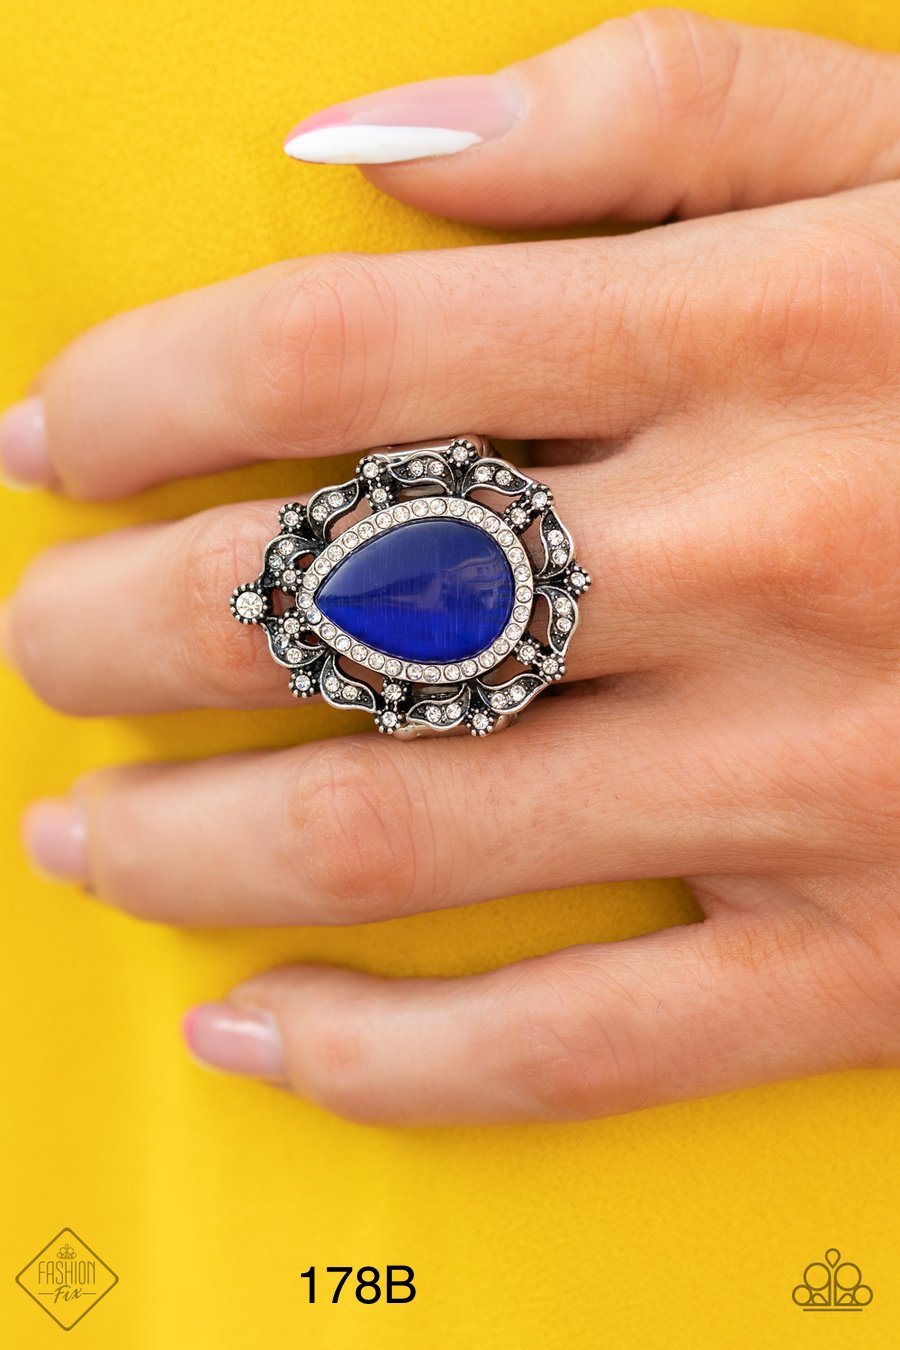 Paparazzi “ Iridescently Icy” Blue Stretch Ring - Cindys Bling Boutique